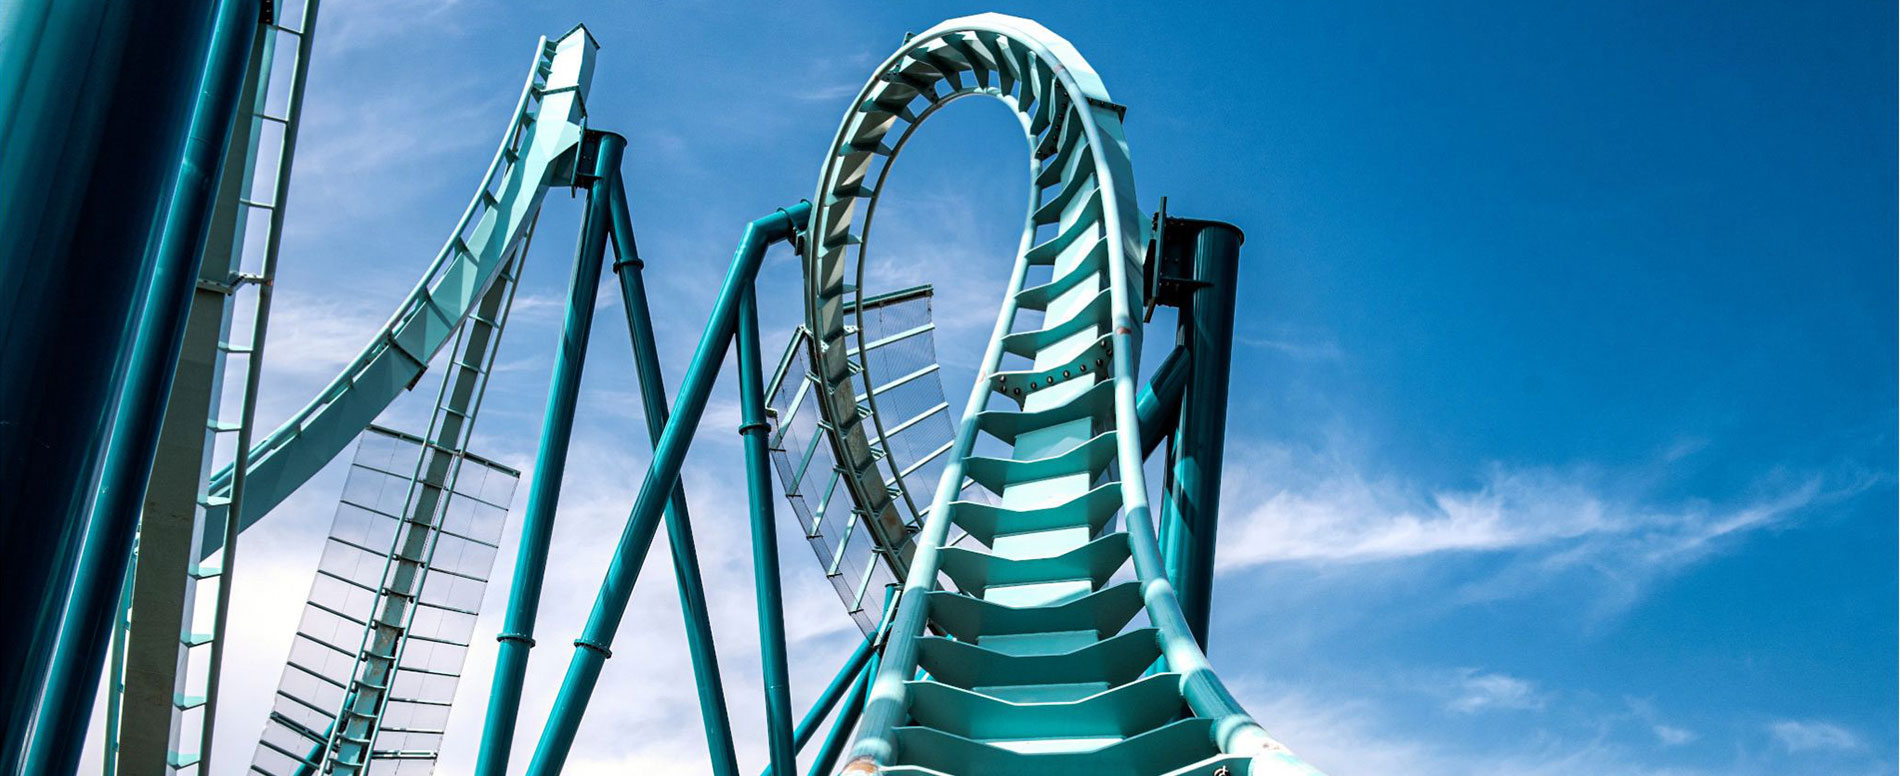 Rides and rollercoasters at SeaWorld San Diego